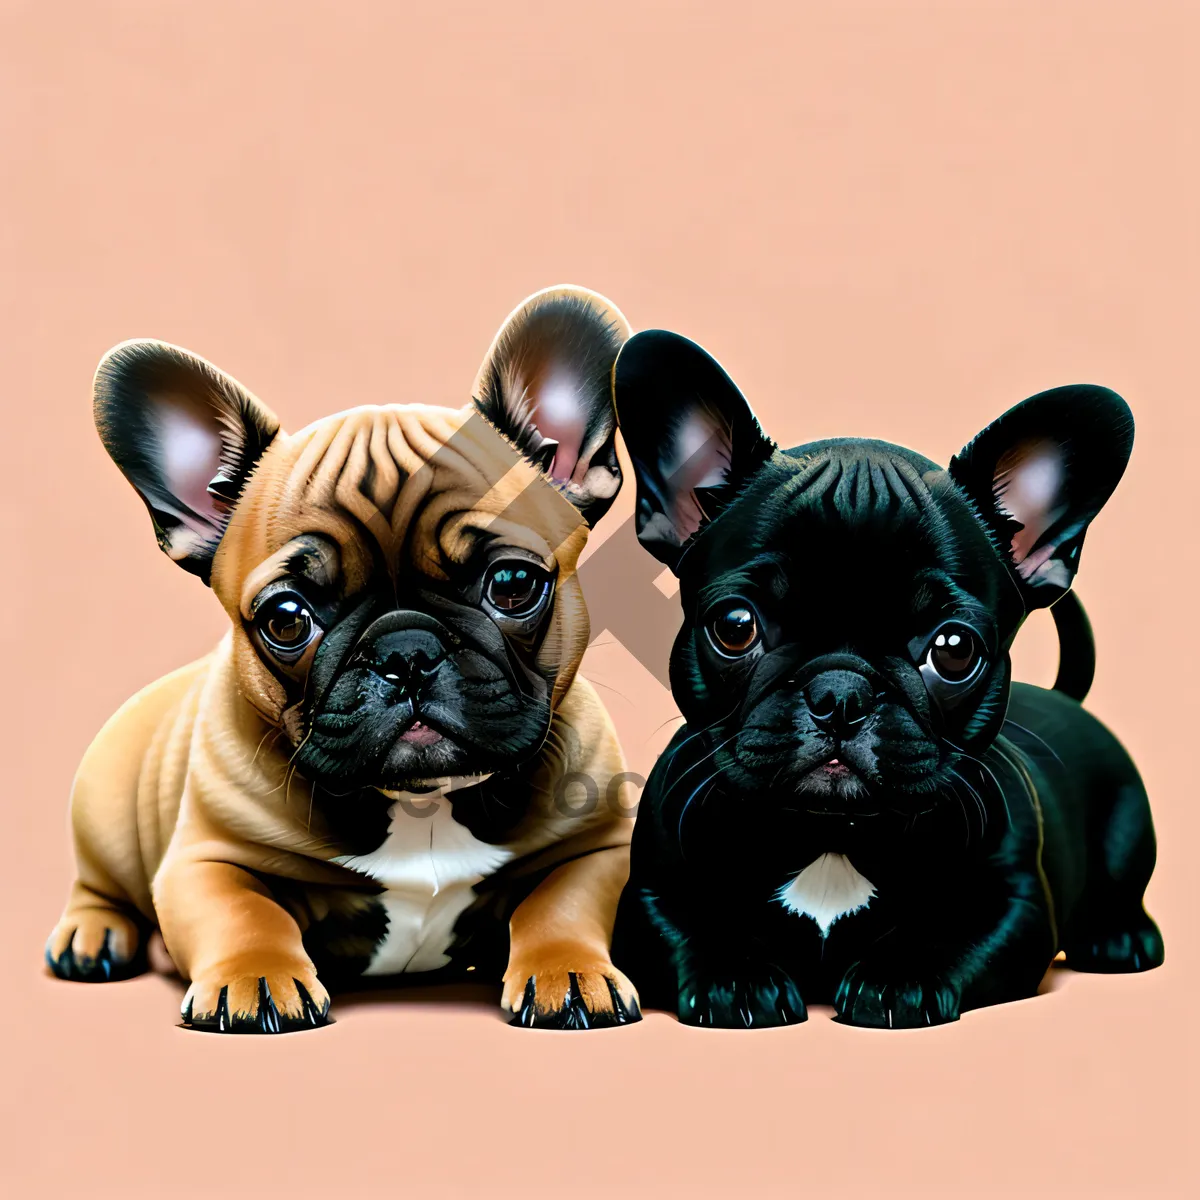 Picture of Adorable French Bulldog puppies in black and red shades